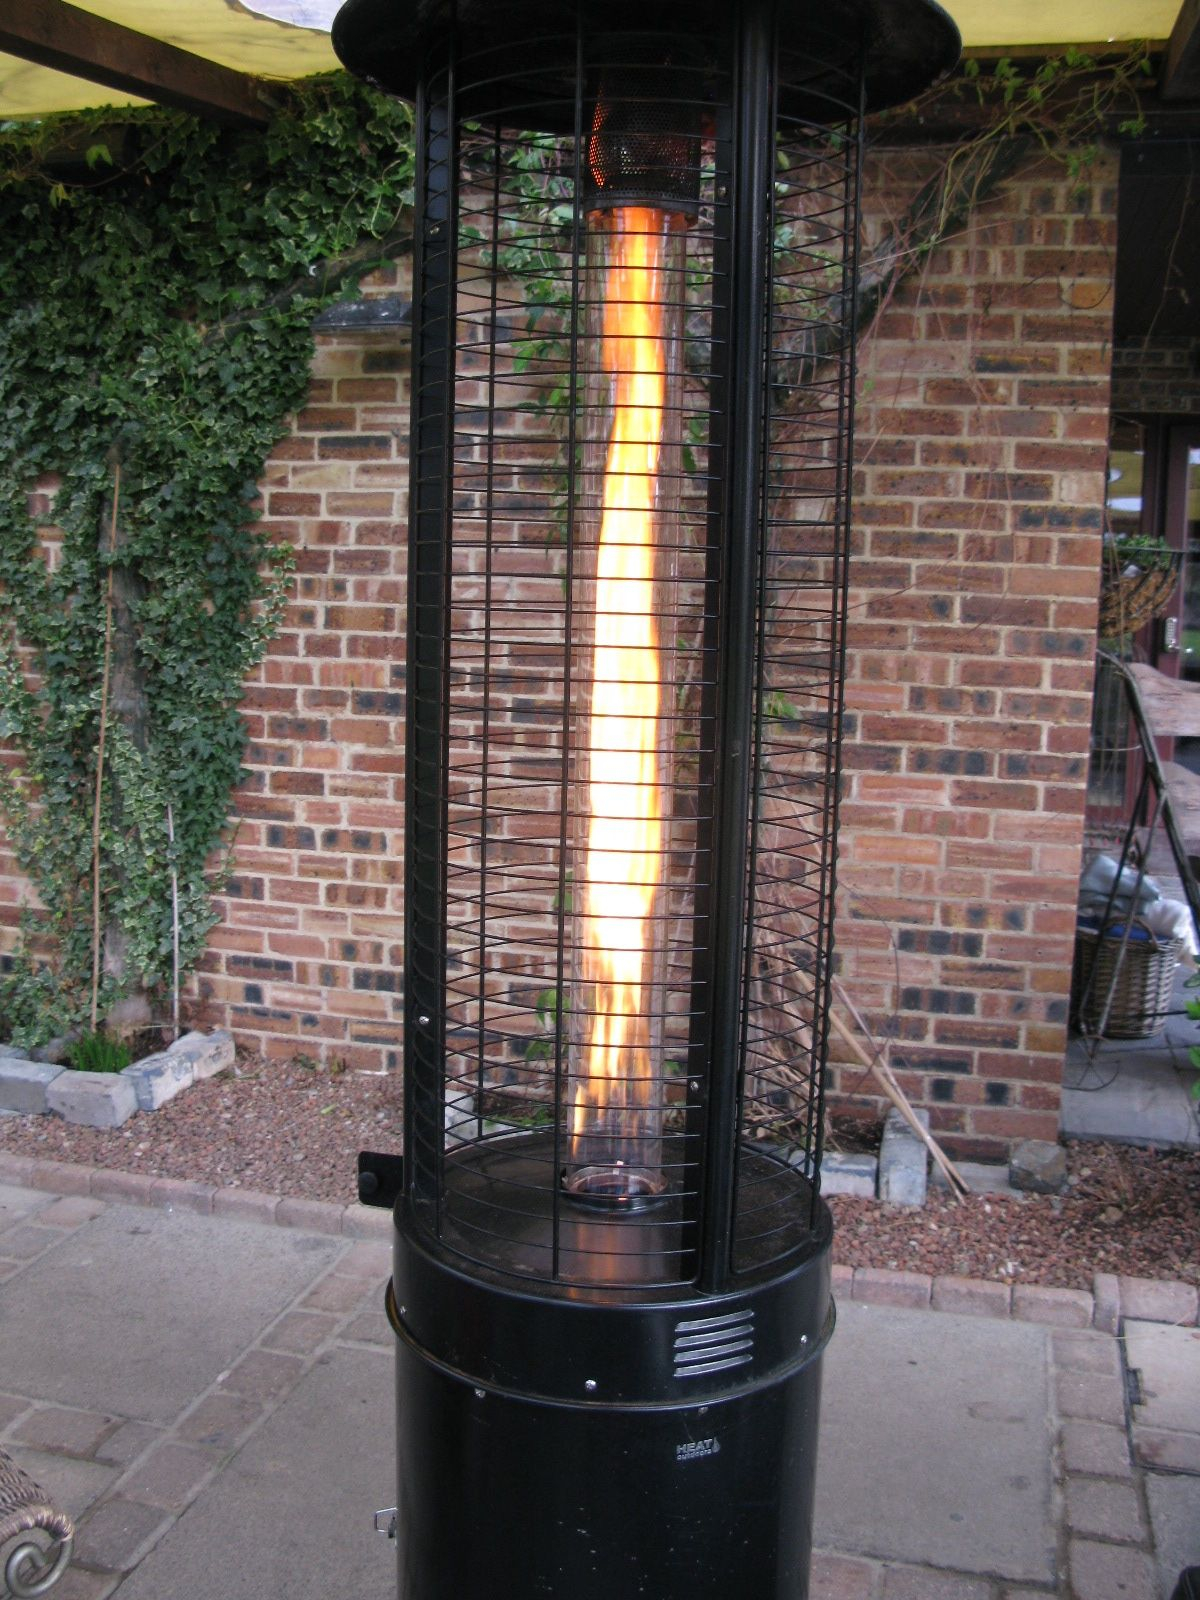 Pin Benny Folanin On Patio Heaters In 2019 Patio Heater intended for proportions 1200 X 1600